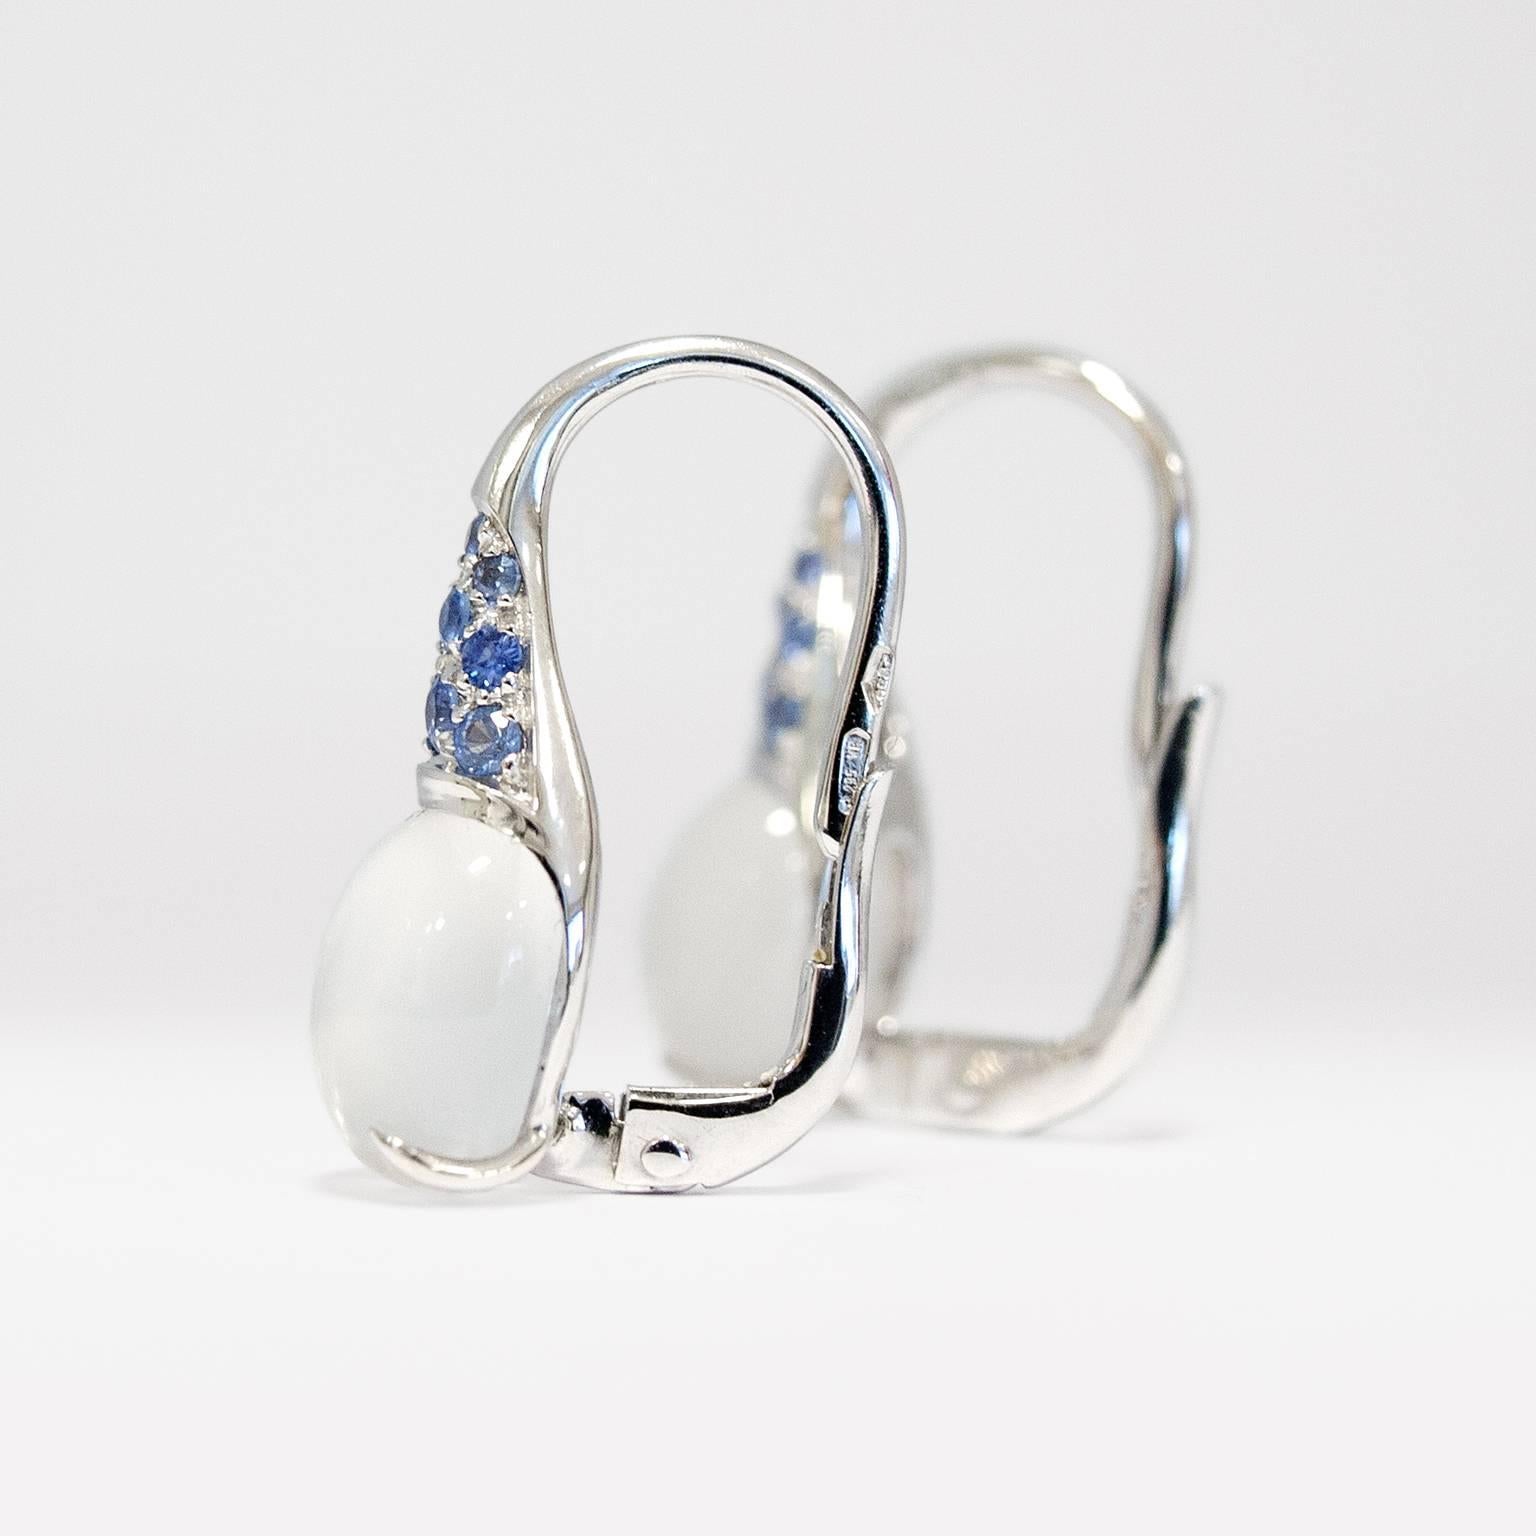 Italian Gemstone Blue Sapphire Moonstone 18 Karat White Gold Drop Hoop Earrings 

These earrings have two moonstone cabochon cut 8x10 mm and ct 0.36 light blue sapphires with lever spring clips in white gold. 
The cabochon are not standard cut, but